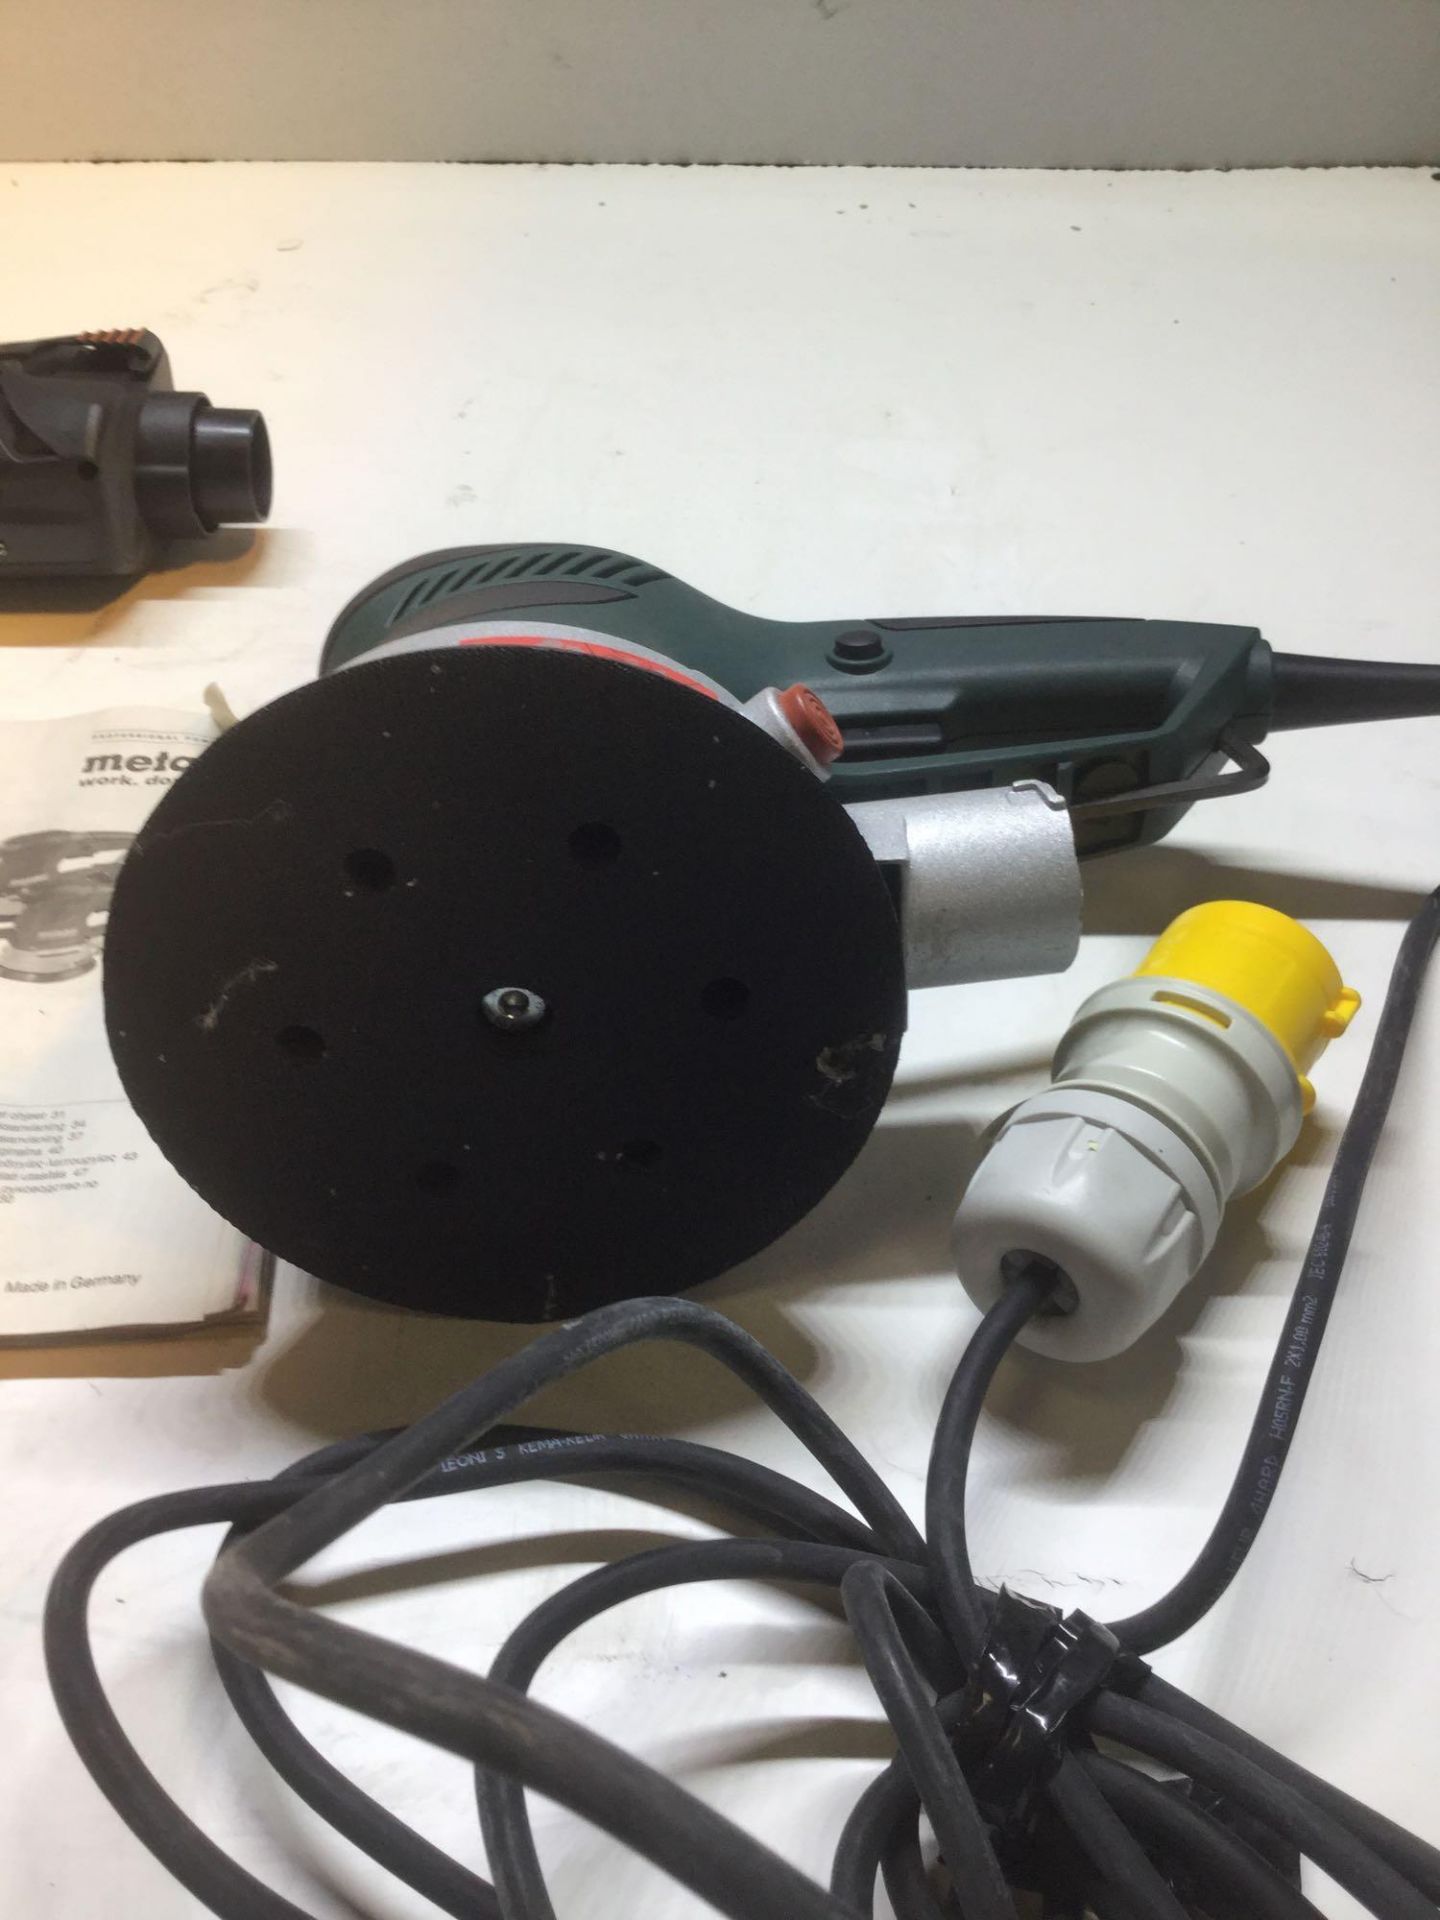 Metabo SXE 450 Orbital Sander c/w Filter & Attachments, 110v Boxed as New - Image 5 of 5